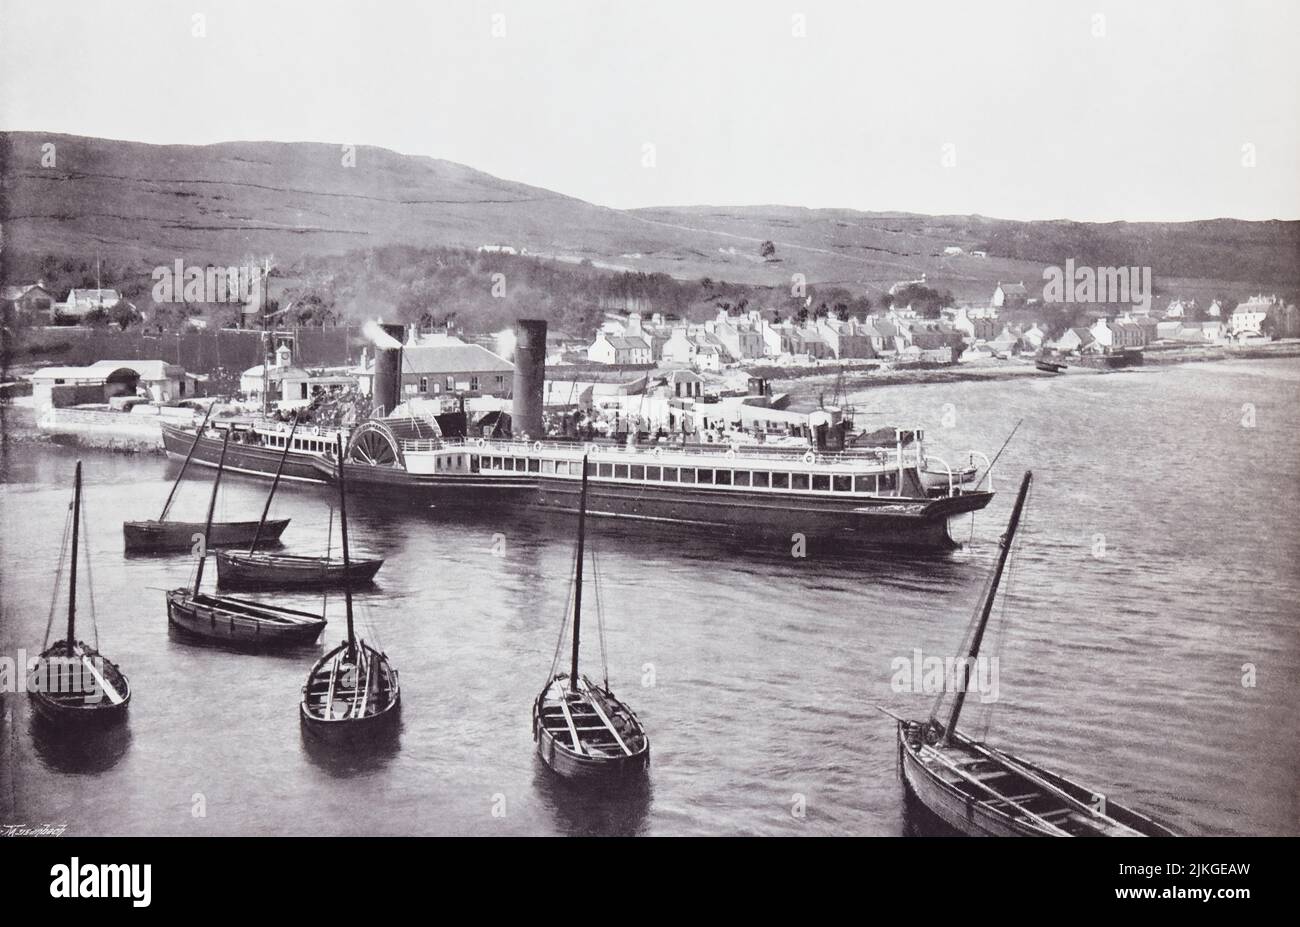 Ardrishaig, Loch Gilp, Argyll and Bute, west of Scotland.  The steamer Columba at Ardrishaig Quay, seen here in the 19th century.  From Around The Coast,  An Album of Pictures from Photographs of the Chief Seaside Places of Interest in Great Britain and Ireland published London, 1895, by George Newnes Limited. Stock Photo